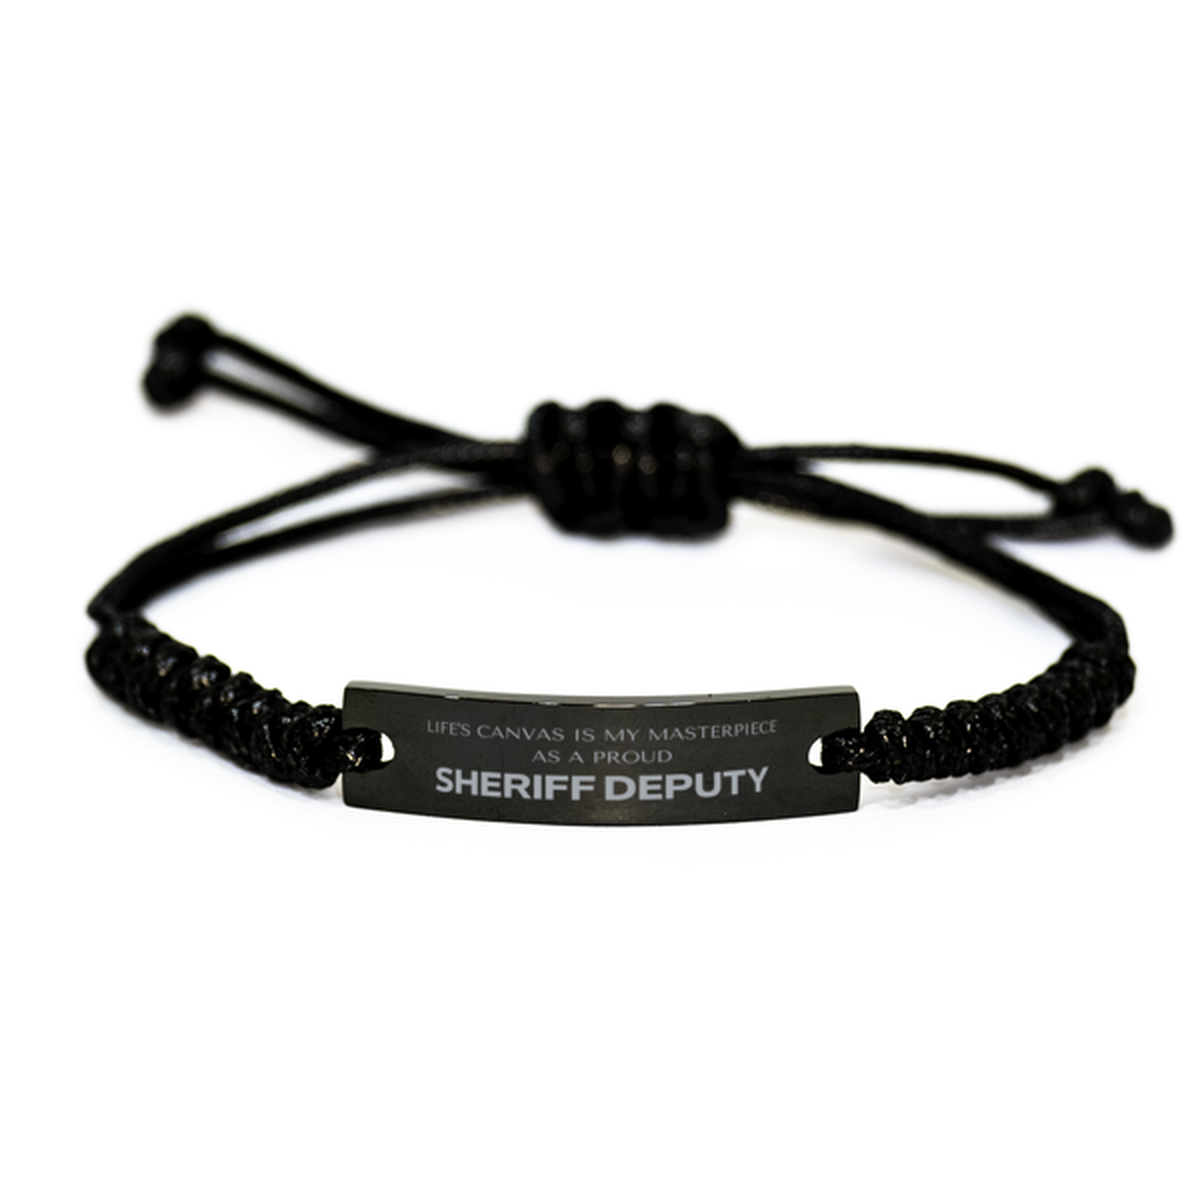 Proud Sheriff Deputy Gifts, Life's canvas is my masterpiece, Epic Birthday Christmas Unique Black Rope Bracelet For Sheriff Deputy, Coworkers, Men, Women, Friends